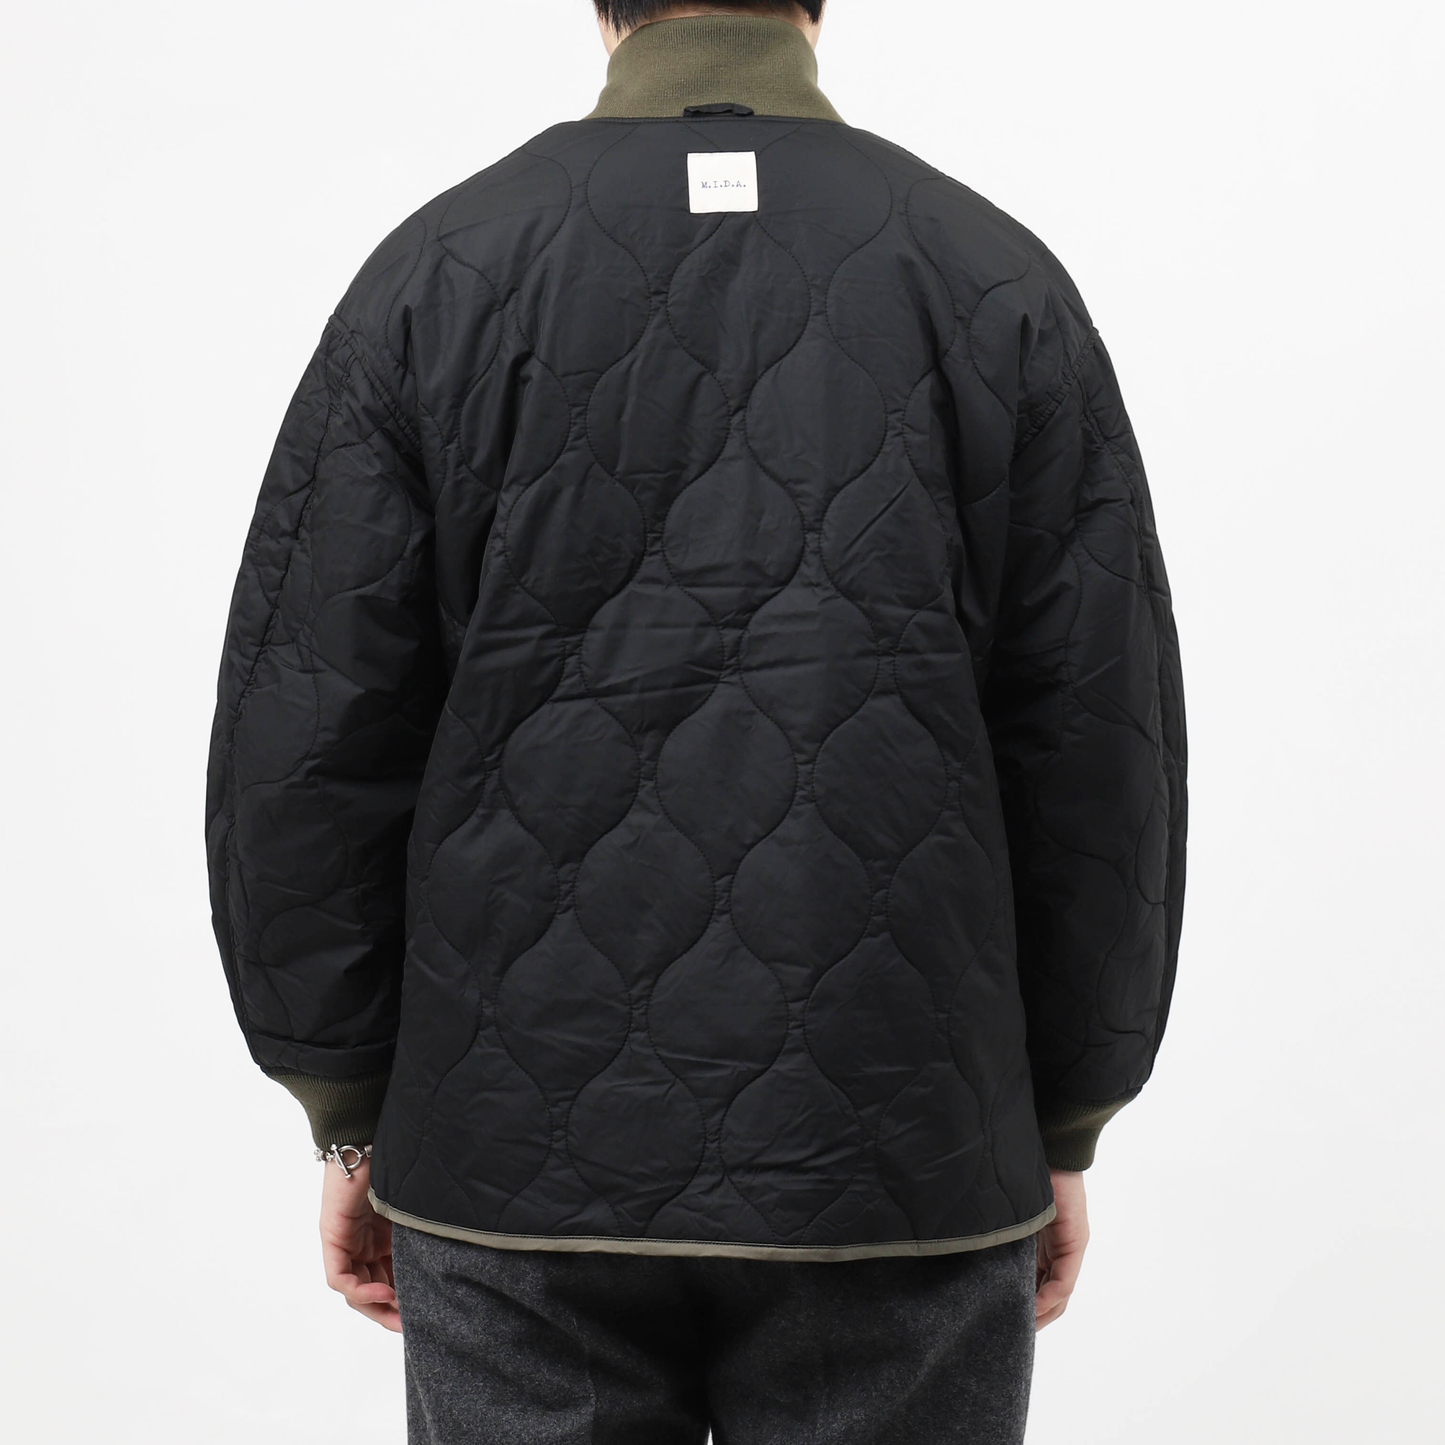 INNER QUILTED PADDING JACKET